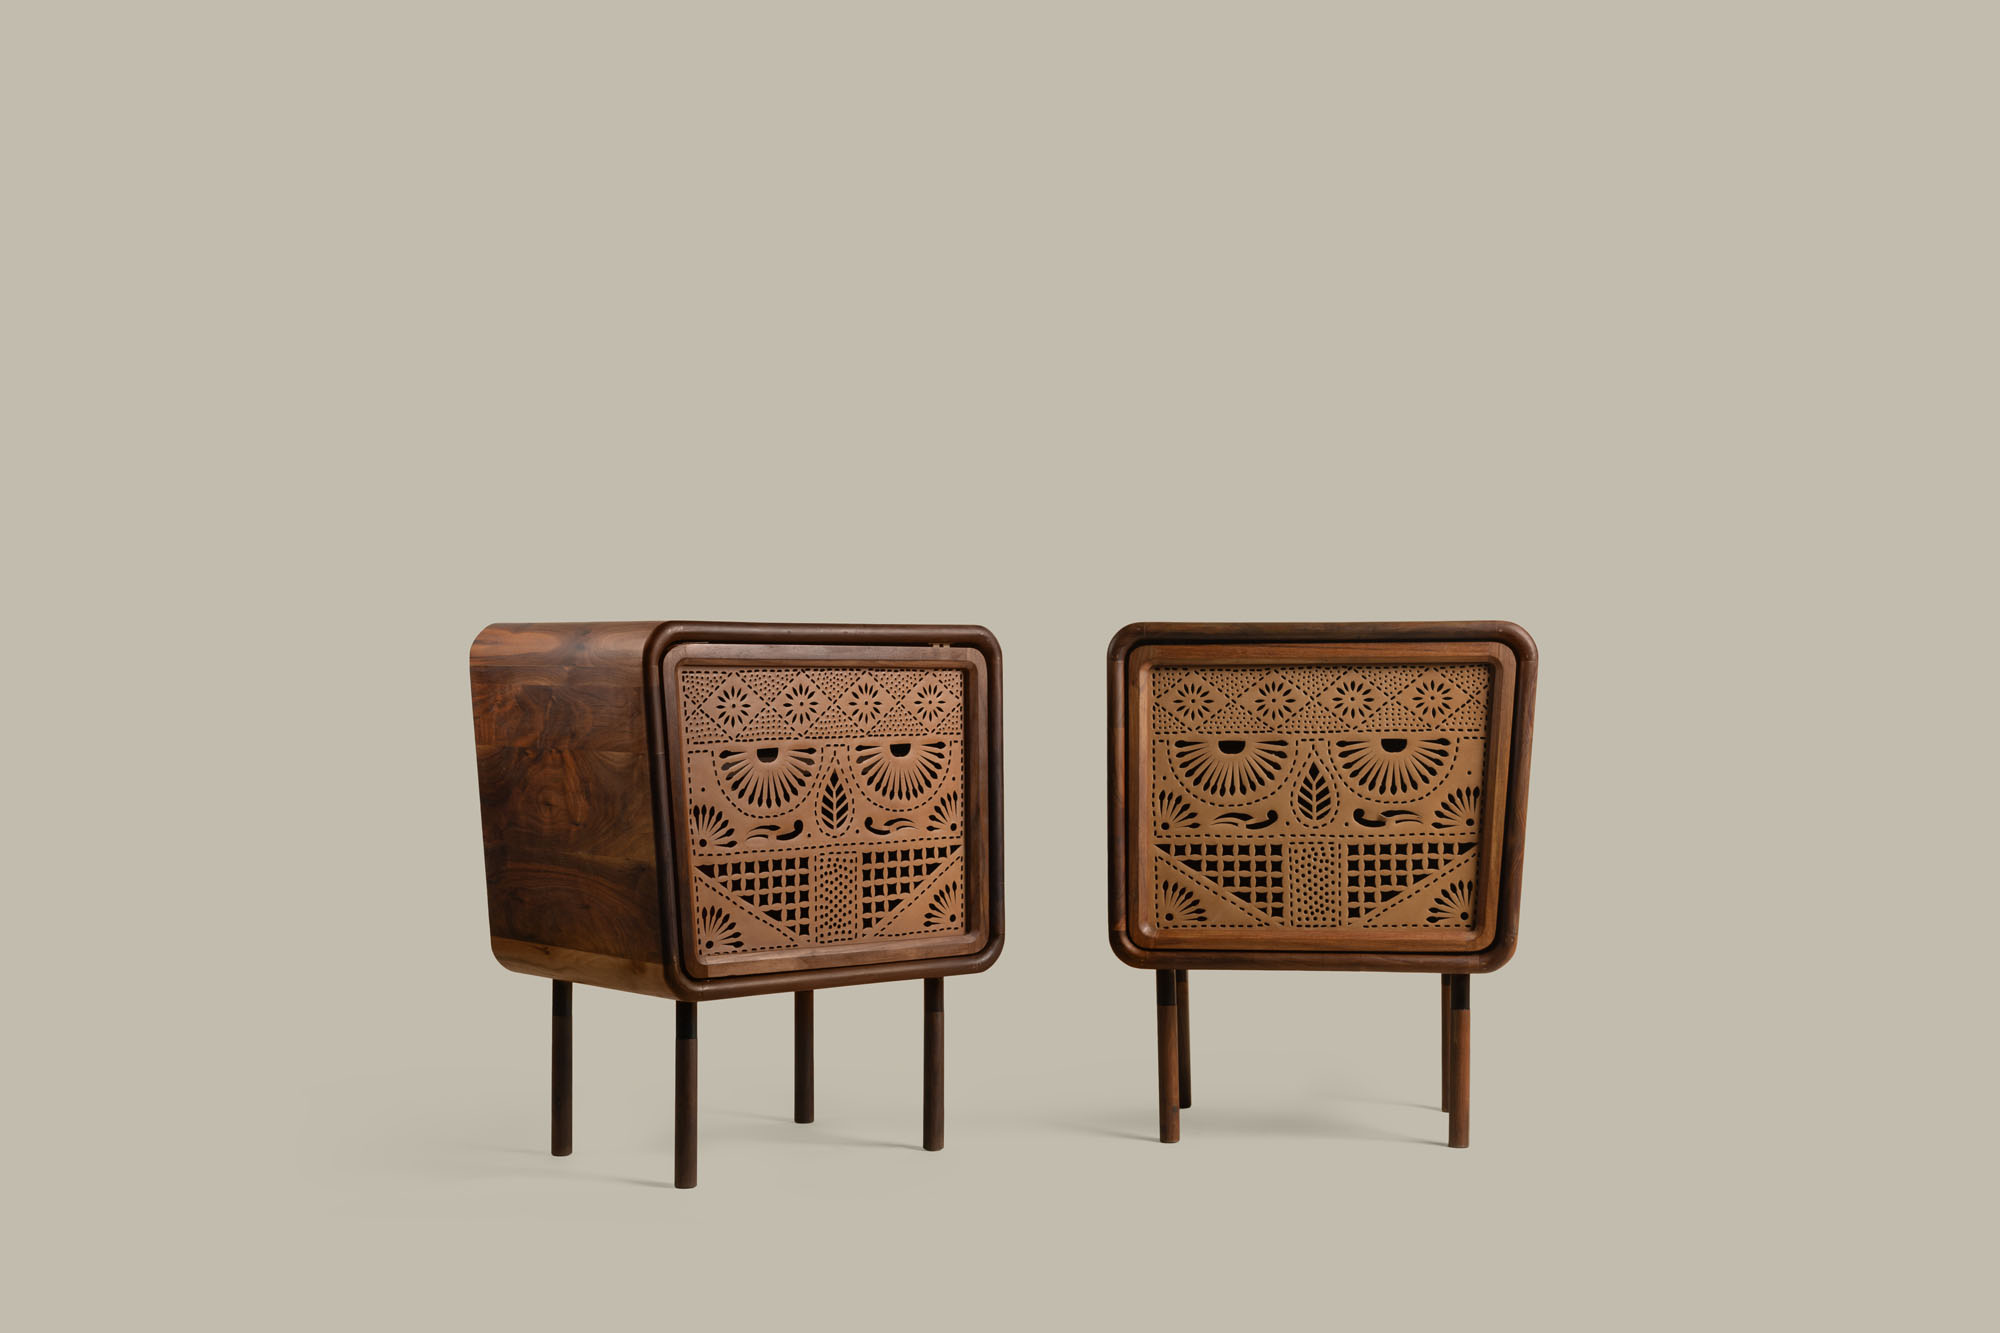 two carved wooden tables against a beige background